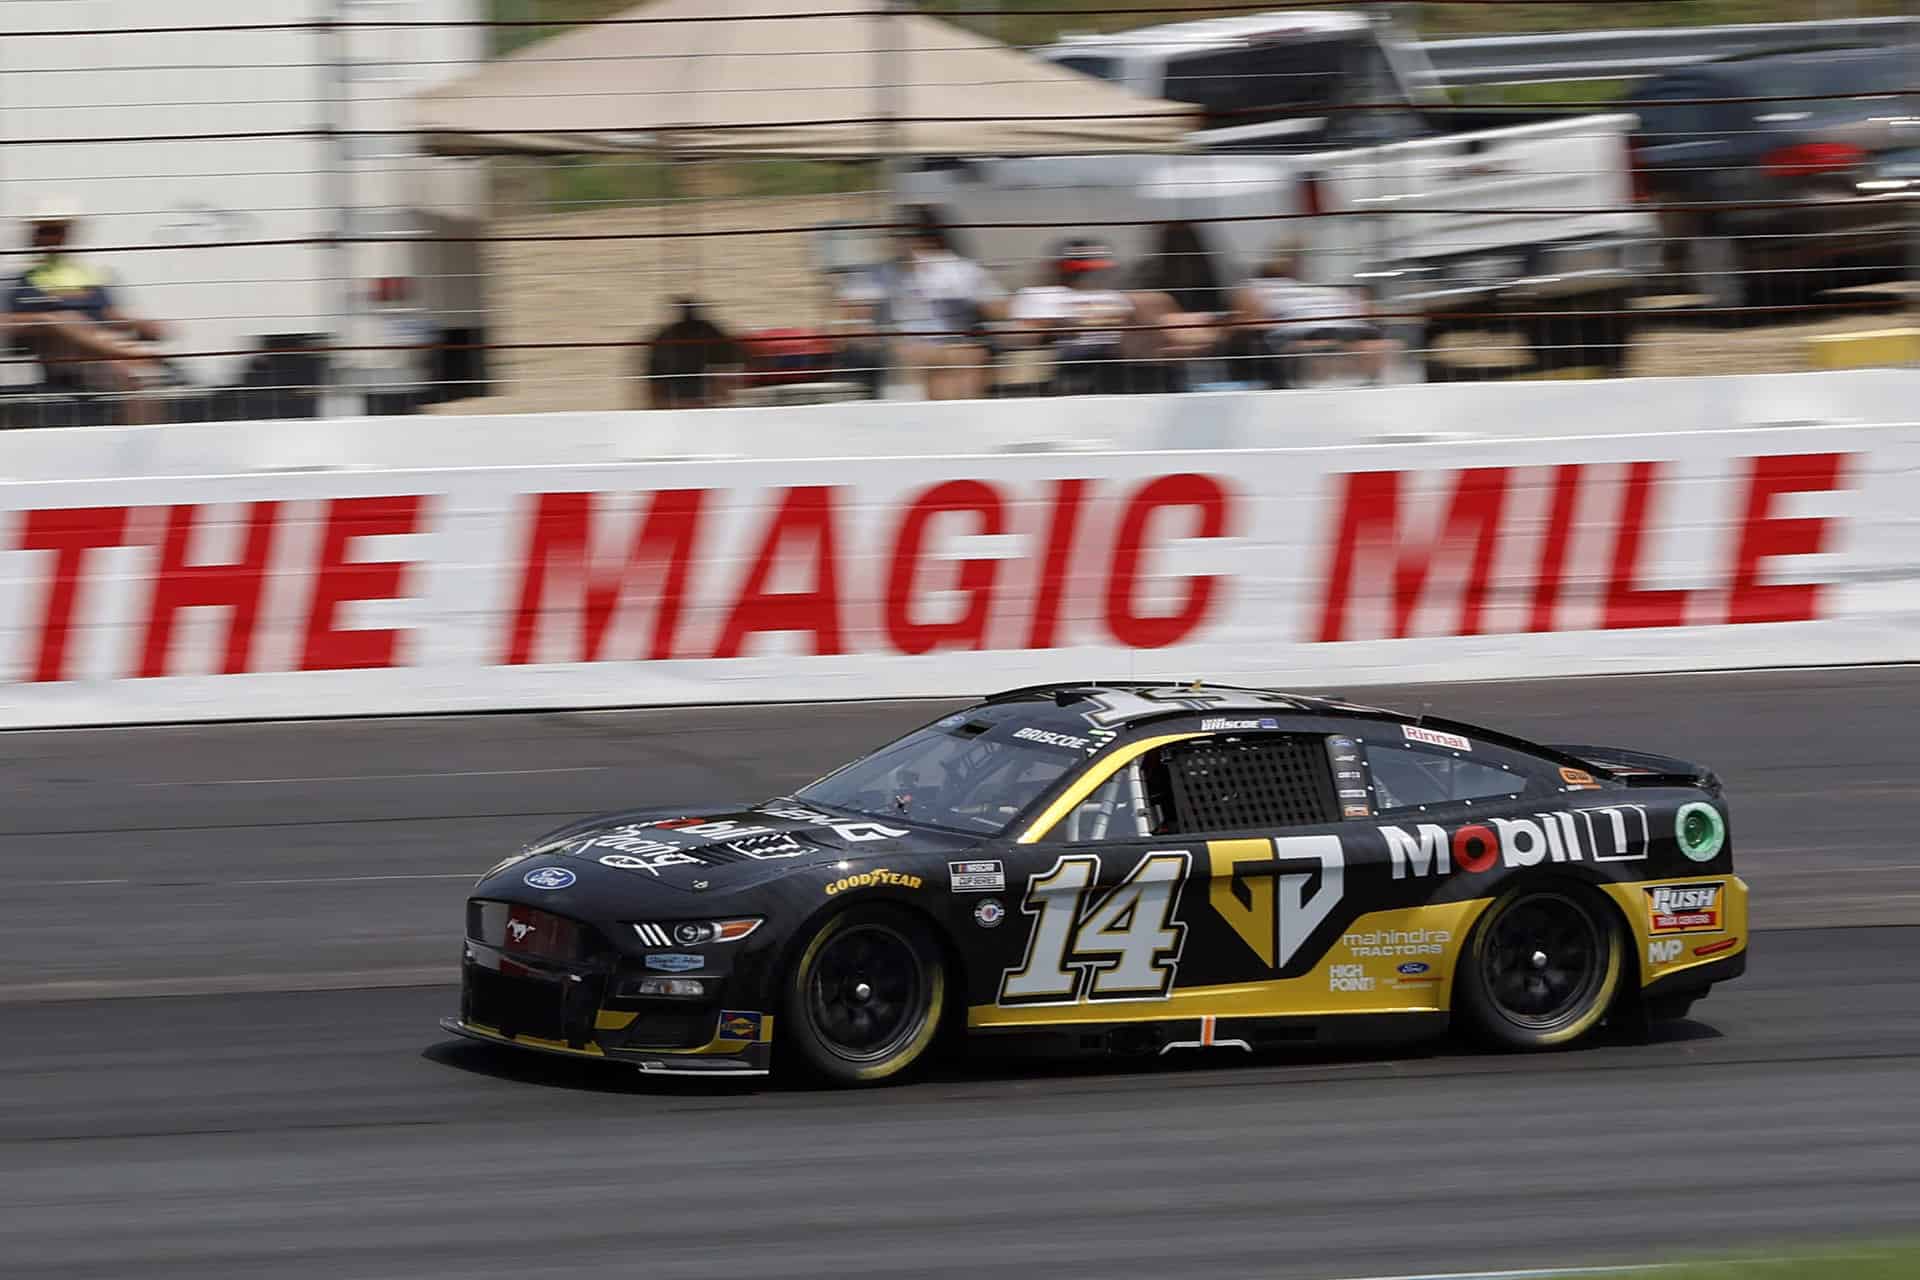 Stewart-Haas Racing's Chase Briscoe earned a top-10 finish in the NASCAR Cup Series Crayon 301 at 'his worst racetrack.'